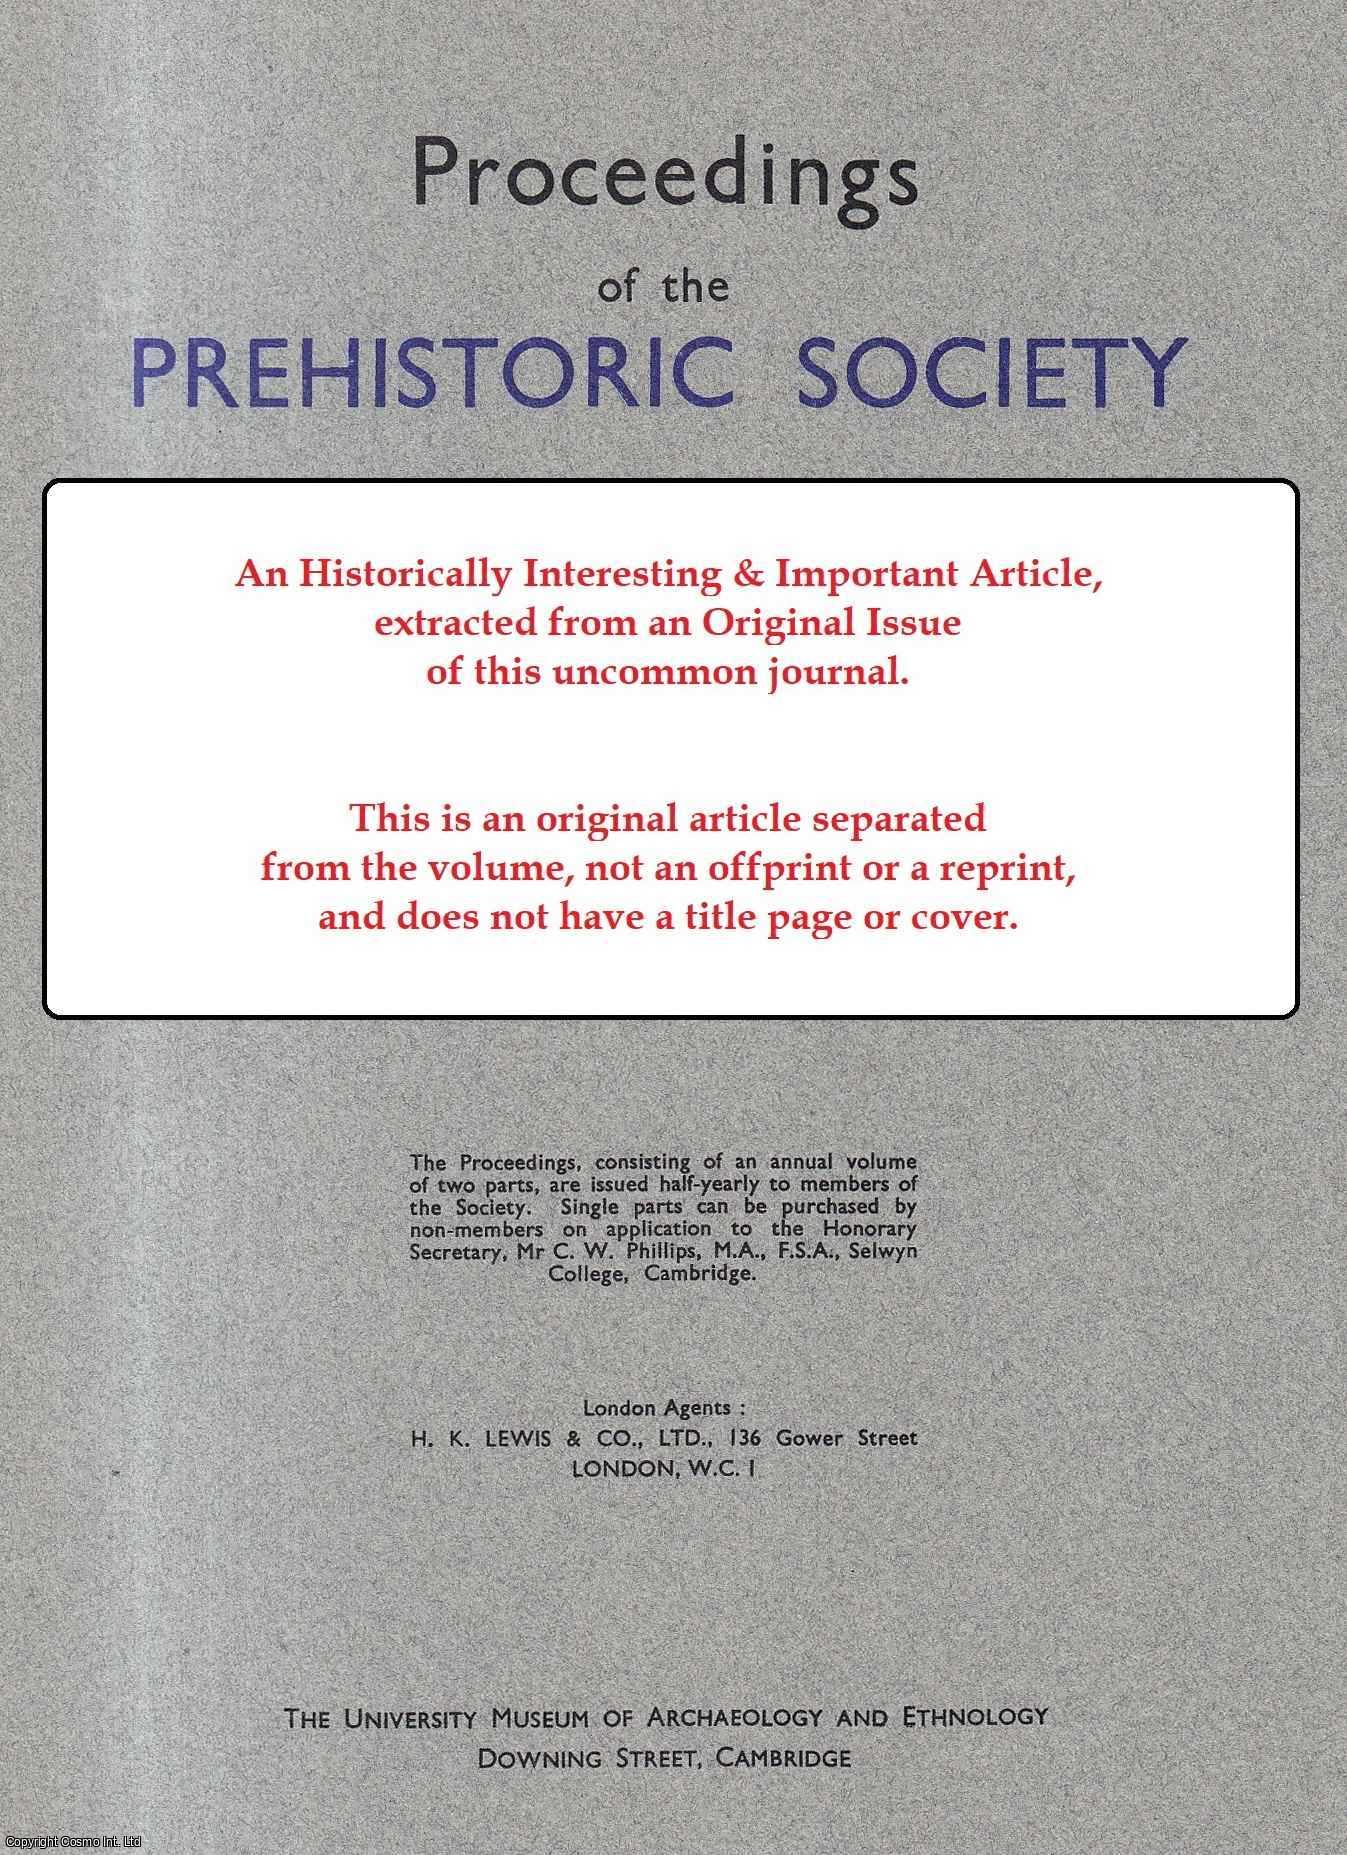 Henry Bury - The Farnham Terraces and their Sequence. An original article from Proceedings of the Prehistoric Society, 1935.